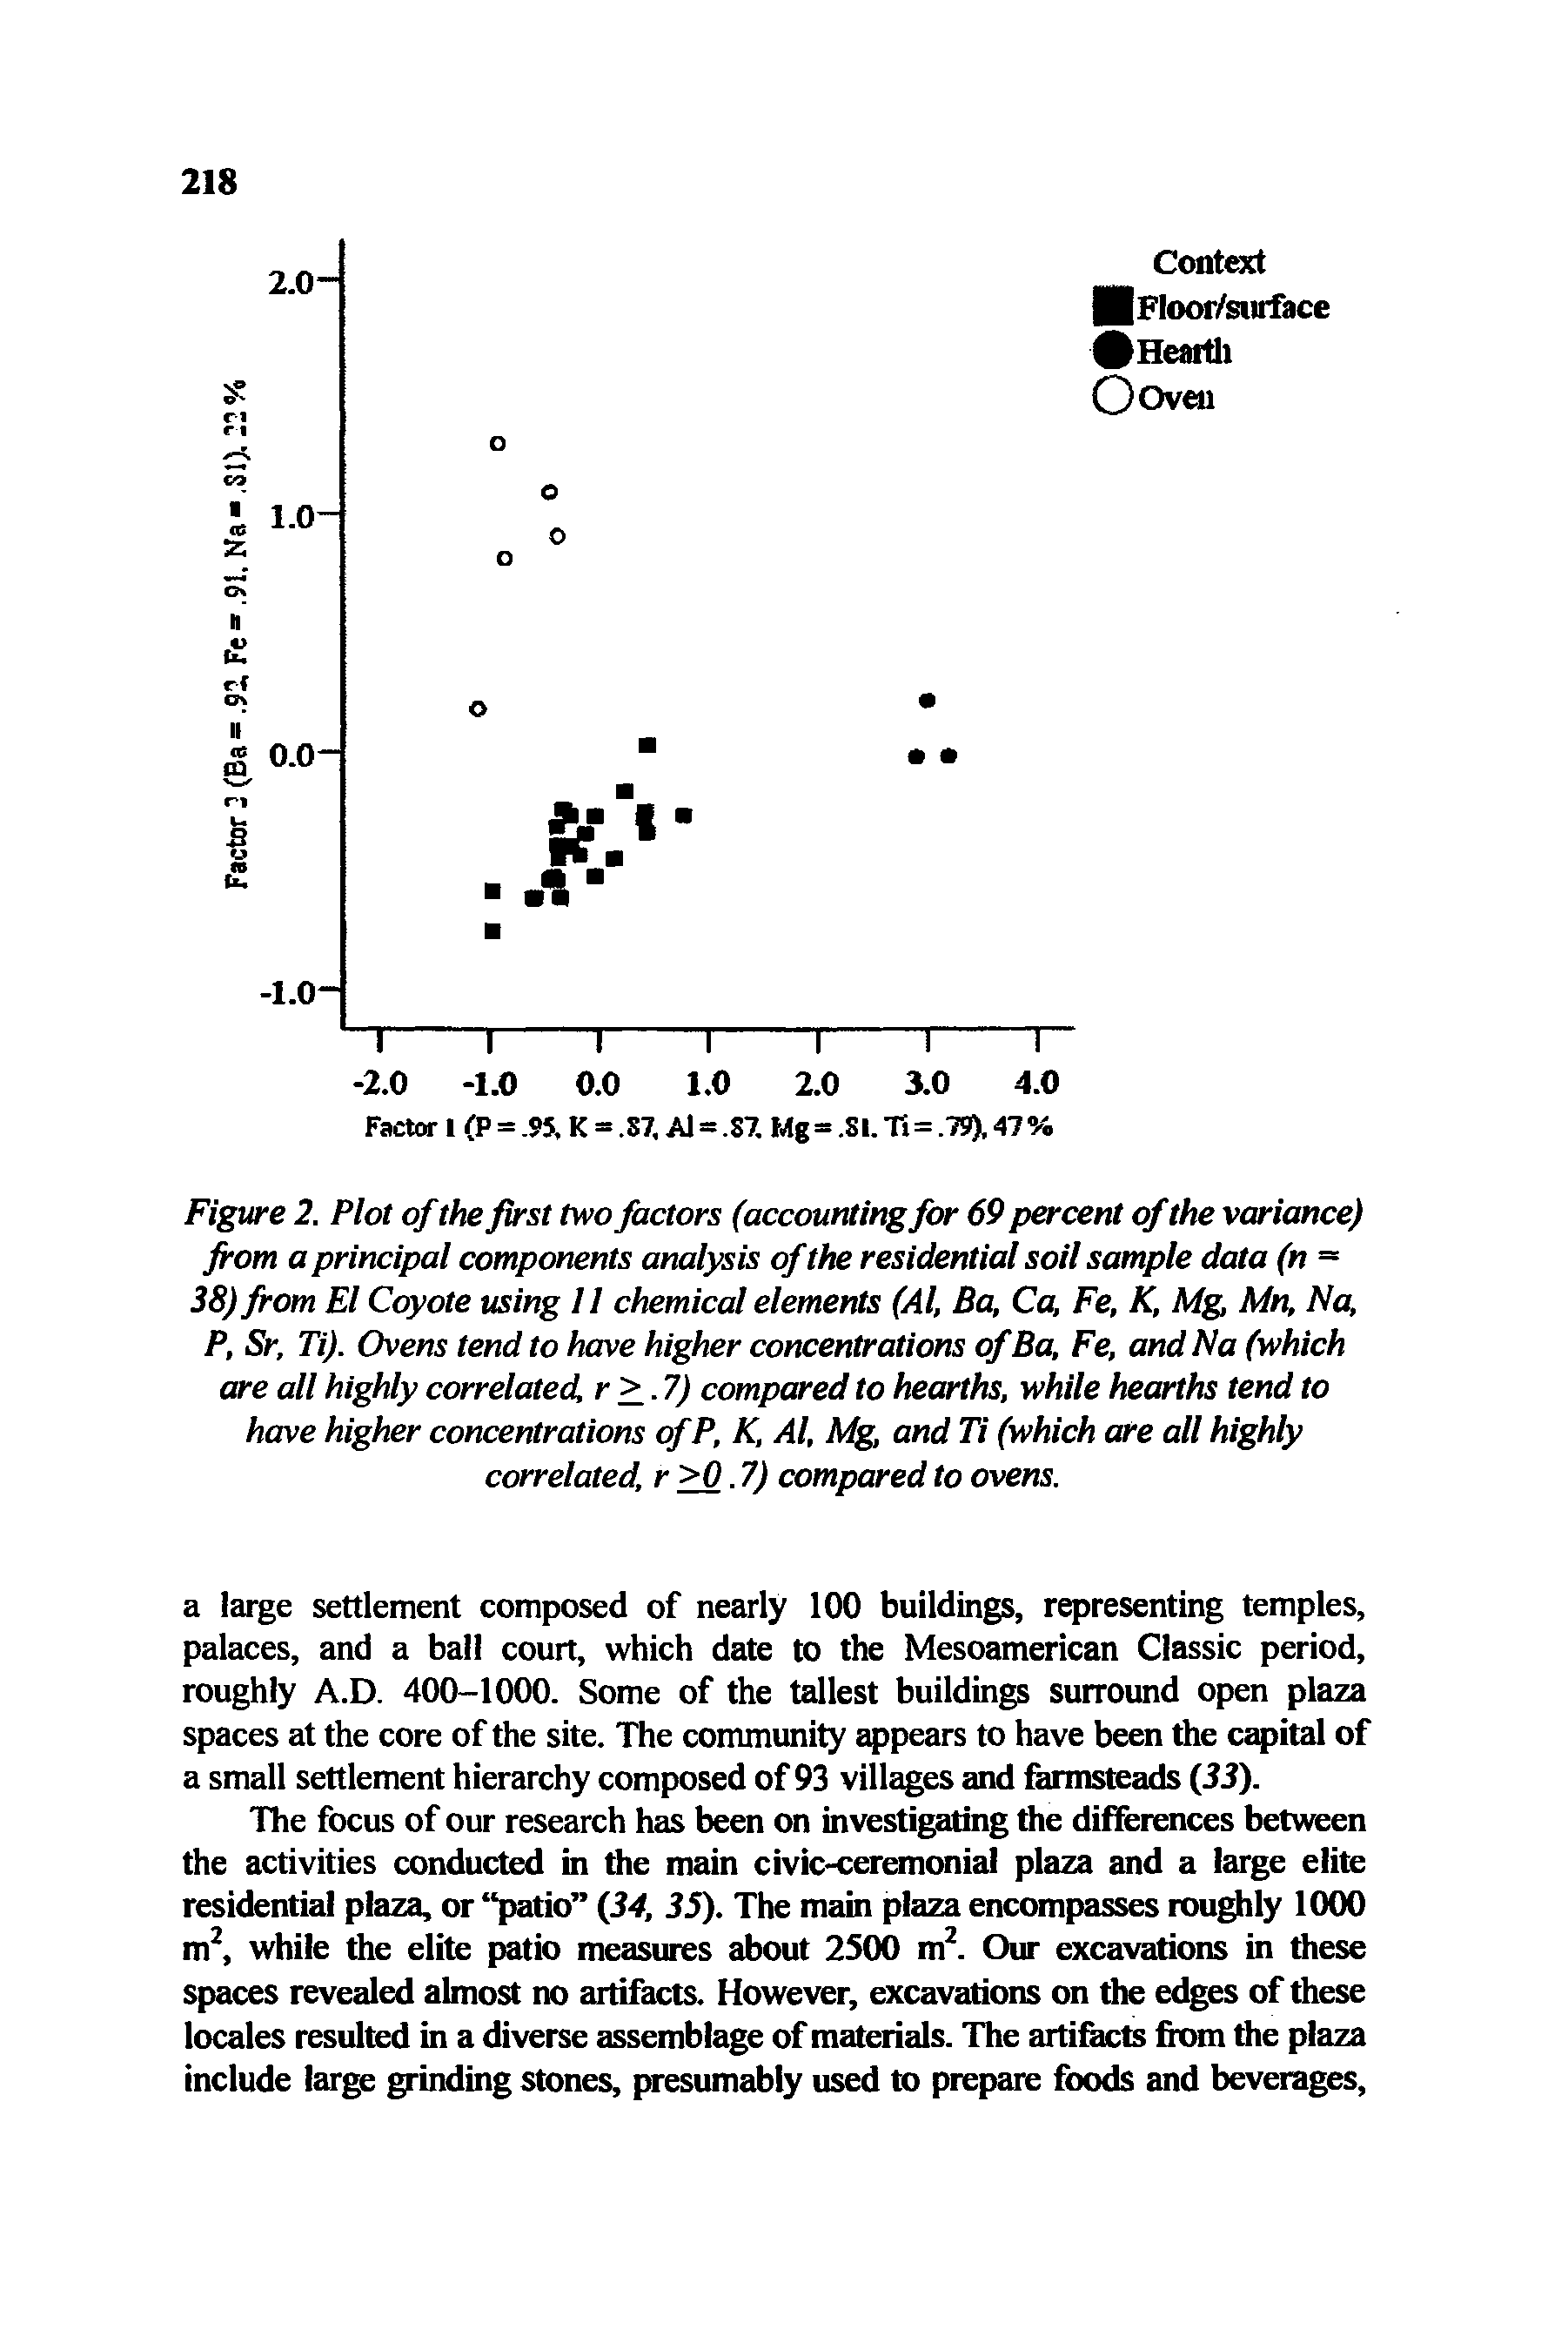 Figure 2. Plot of the first two factors (accounting for 69 percent of the variance) from a principal components analysis of the residential soil sample data (n = 38) from El Coyote using 11 chemical elements (Al, Ba, Ca, Fe, K, Mg Mn, Na, P, Sr, Ti). Ovens tend to have higher concentrations ofBa, Fe, and Na (which are all highly correlated, r>.7) compared to hearths, while hearths tend to have higher concentrations of P, K, Al, Mg and Ti (which are all highly correlated, r>0.7) compared to ovens.